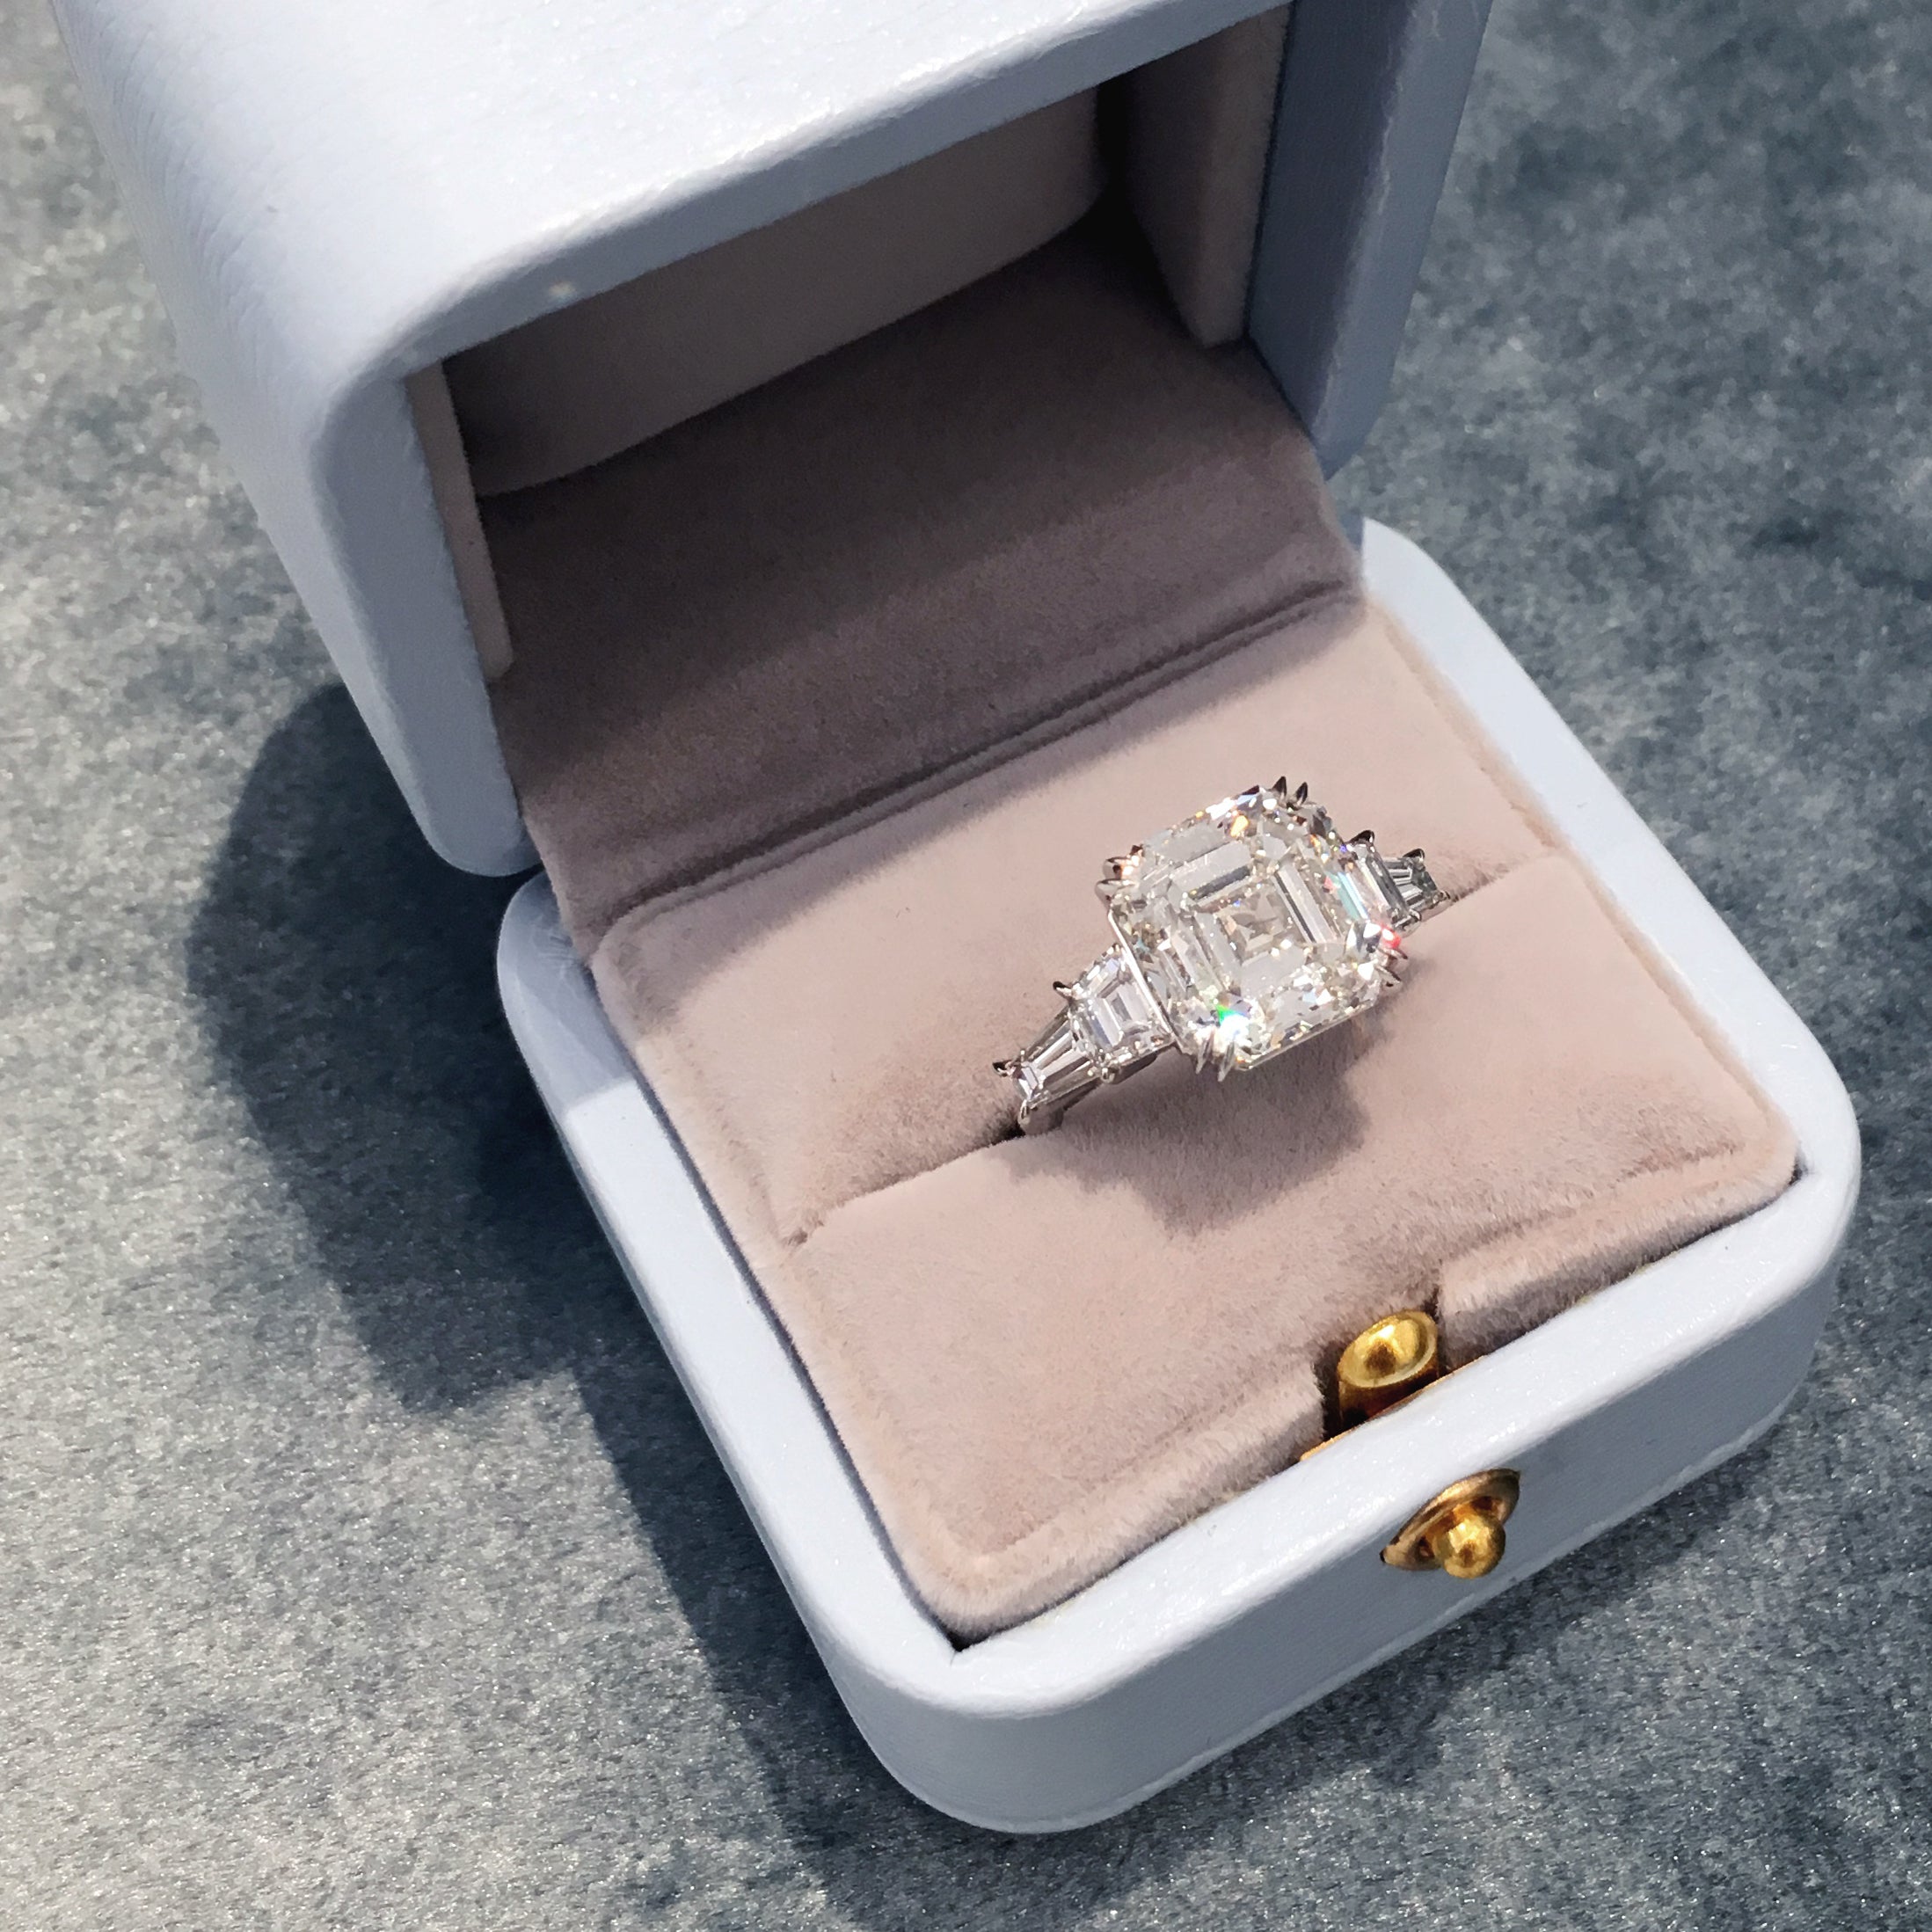 Say “I Do” with Gorgeous Rings From These Hong Kong Jewelers!